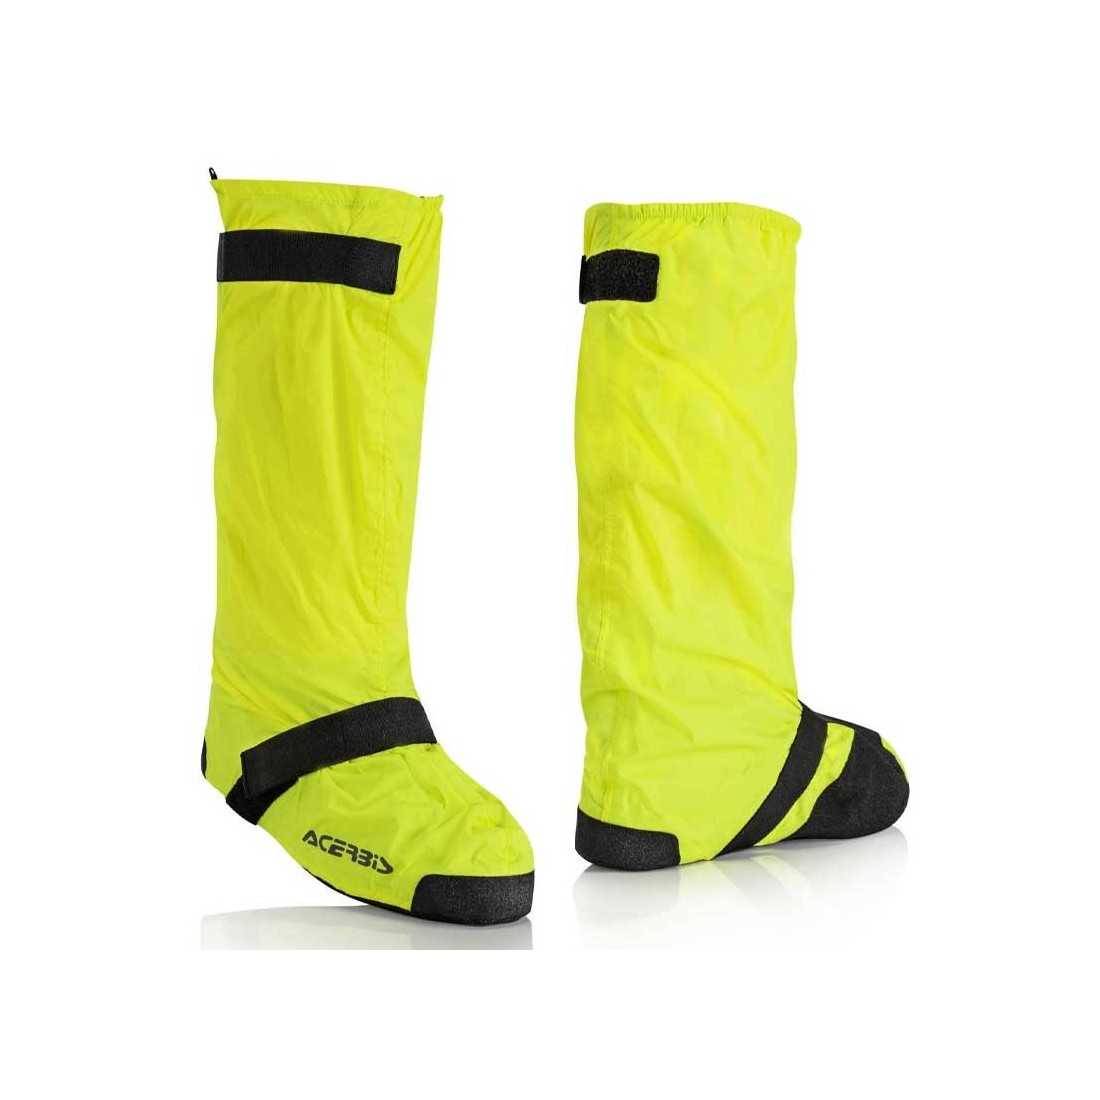 Acerbis yellow fluo motorcycle rain boots cover